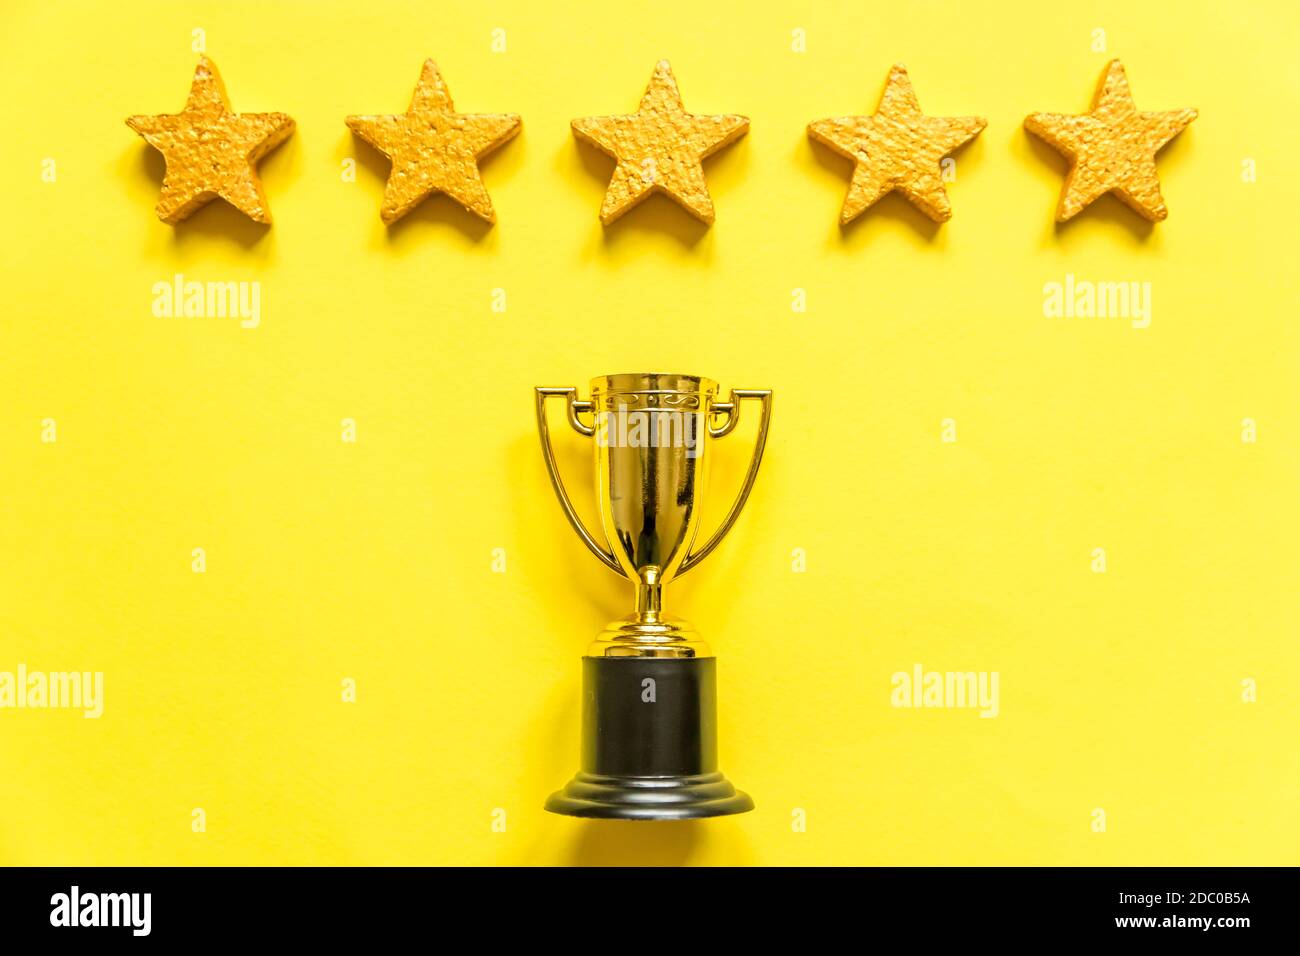 https://c8.alamy.com/comp/2DC0B5A/simply-flat-lay-design-winner-or-champion-gold-trophy-cup-and-5-stars-rating-isolated-on-yellow-background-victory-first-place-of-competition-winnin-2DC0B5A.jpg